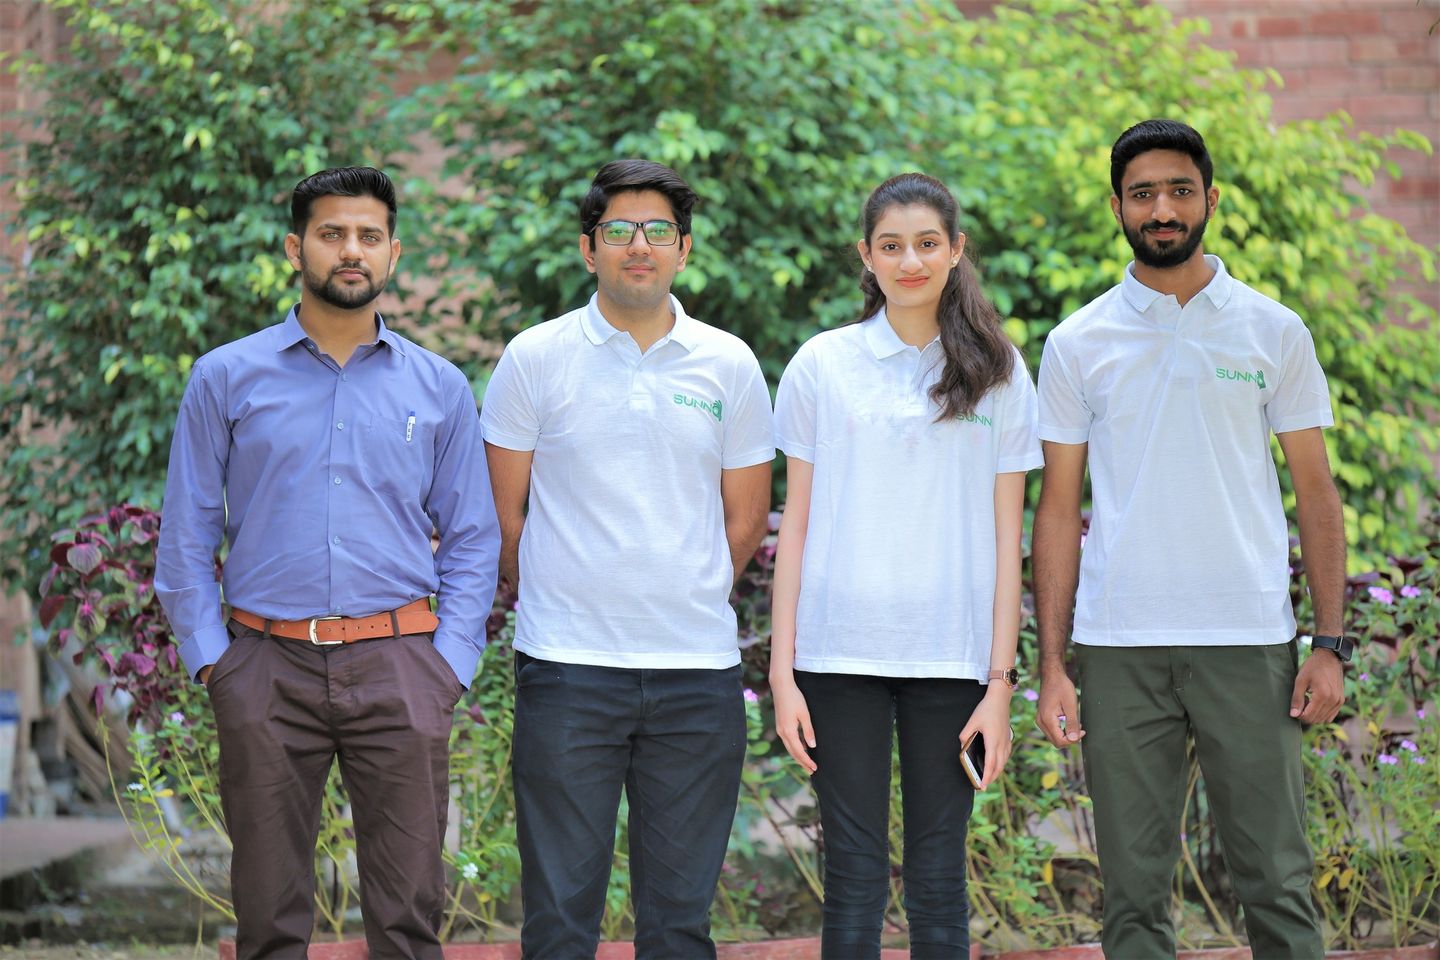 APICTA 2022 HAS CROWNED M-LABS GRADS AS ITS WINNERS